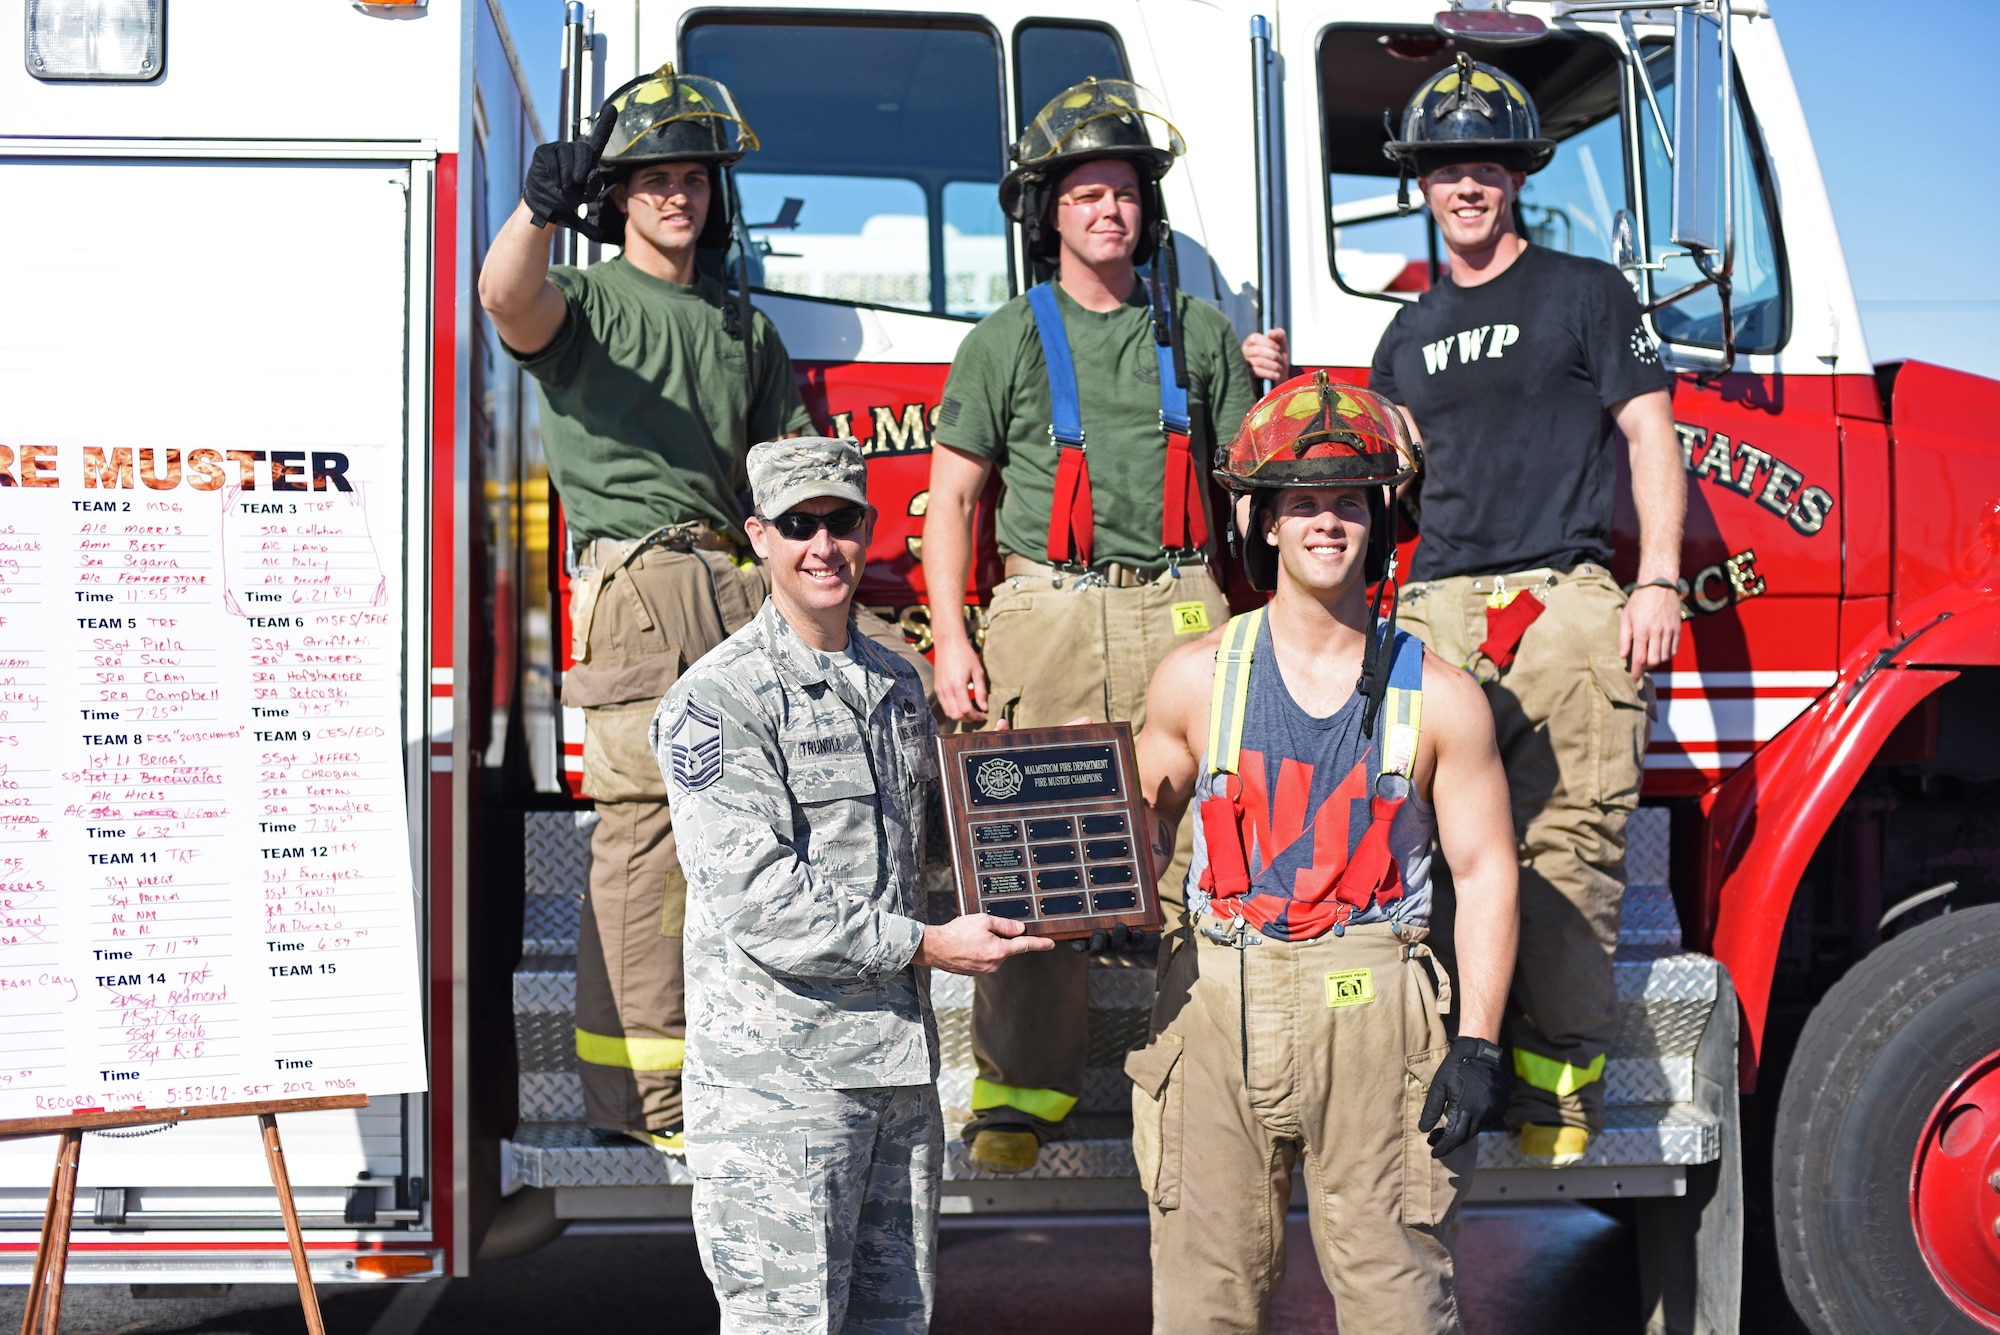 The winning team of Malmstrom Air Force Base’s fourth annual Fire Prevention Week fire muster pose for a photograph after recovering from the challenge Oct. 10. Airmen with the 341st Security Forces Group Tactical Response Force took first place with a winning time of six minutes and twenty one seconds. (U.S. Air Force photo/Airman 1st Class Collin Schmidt)